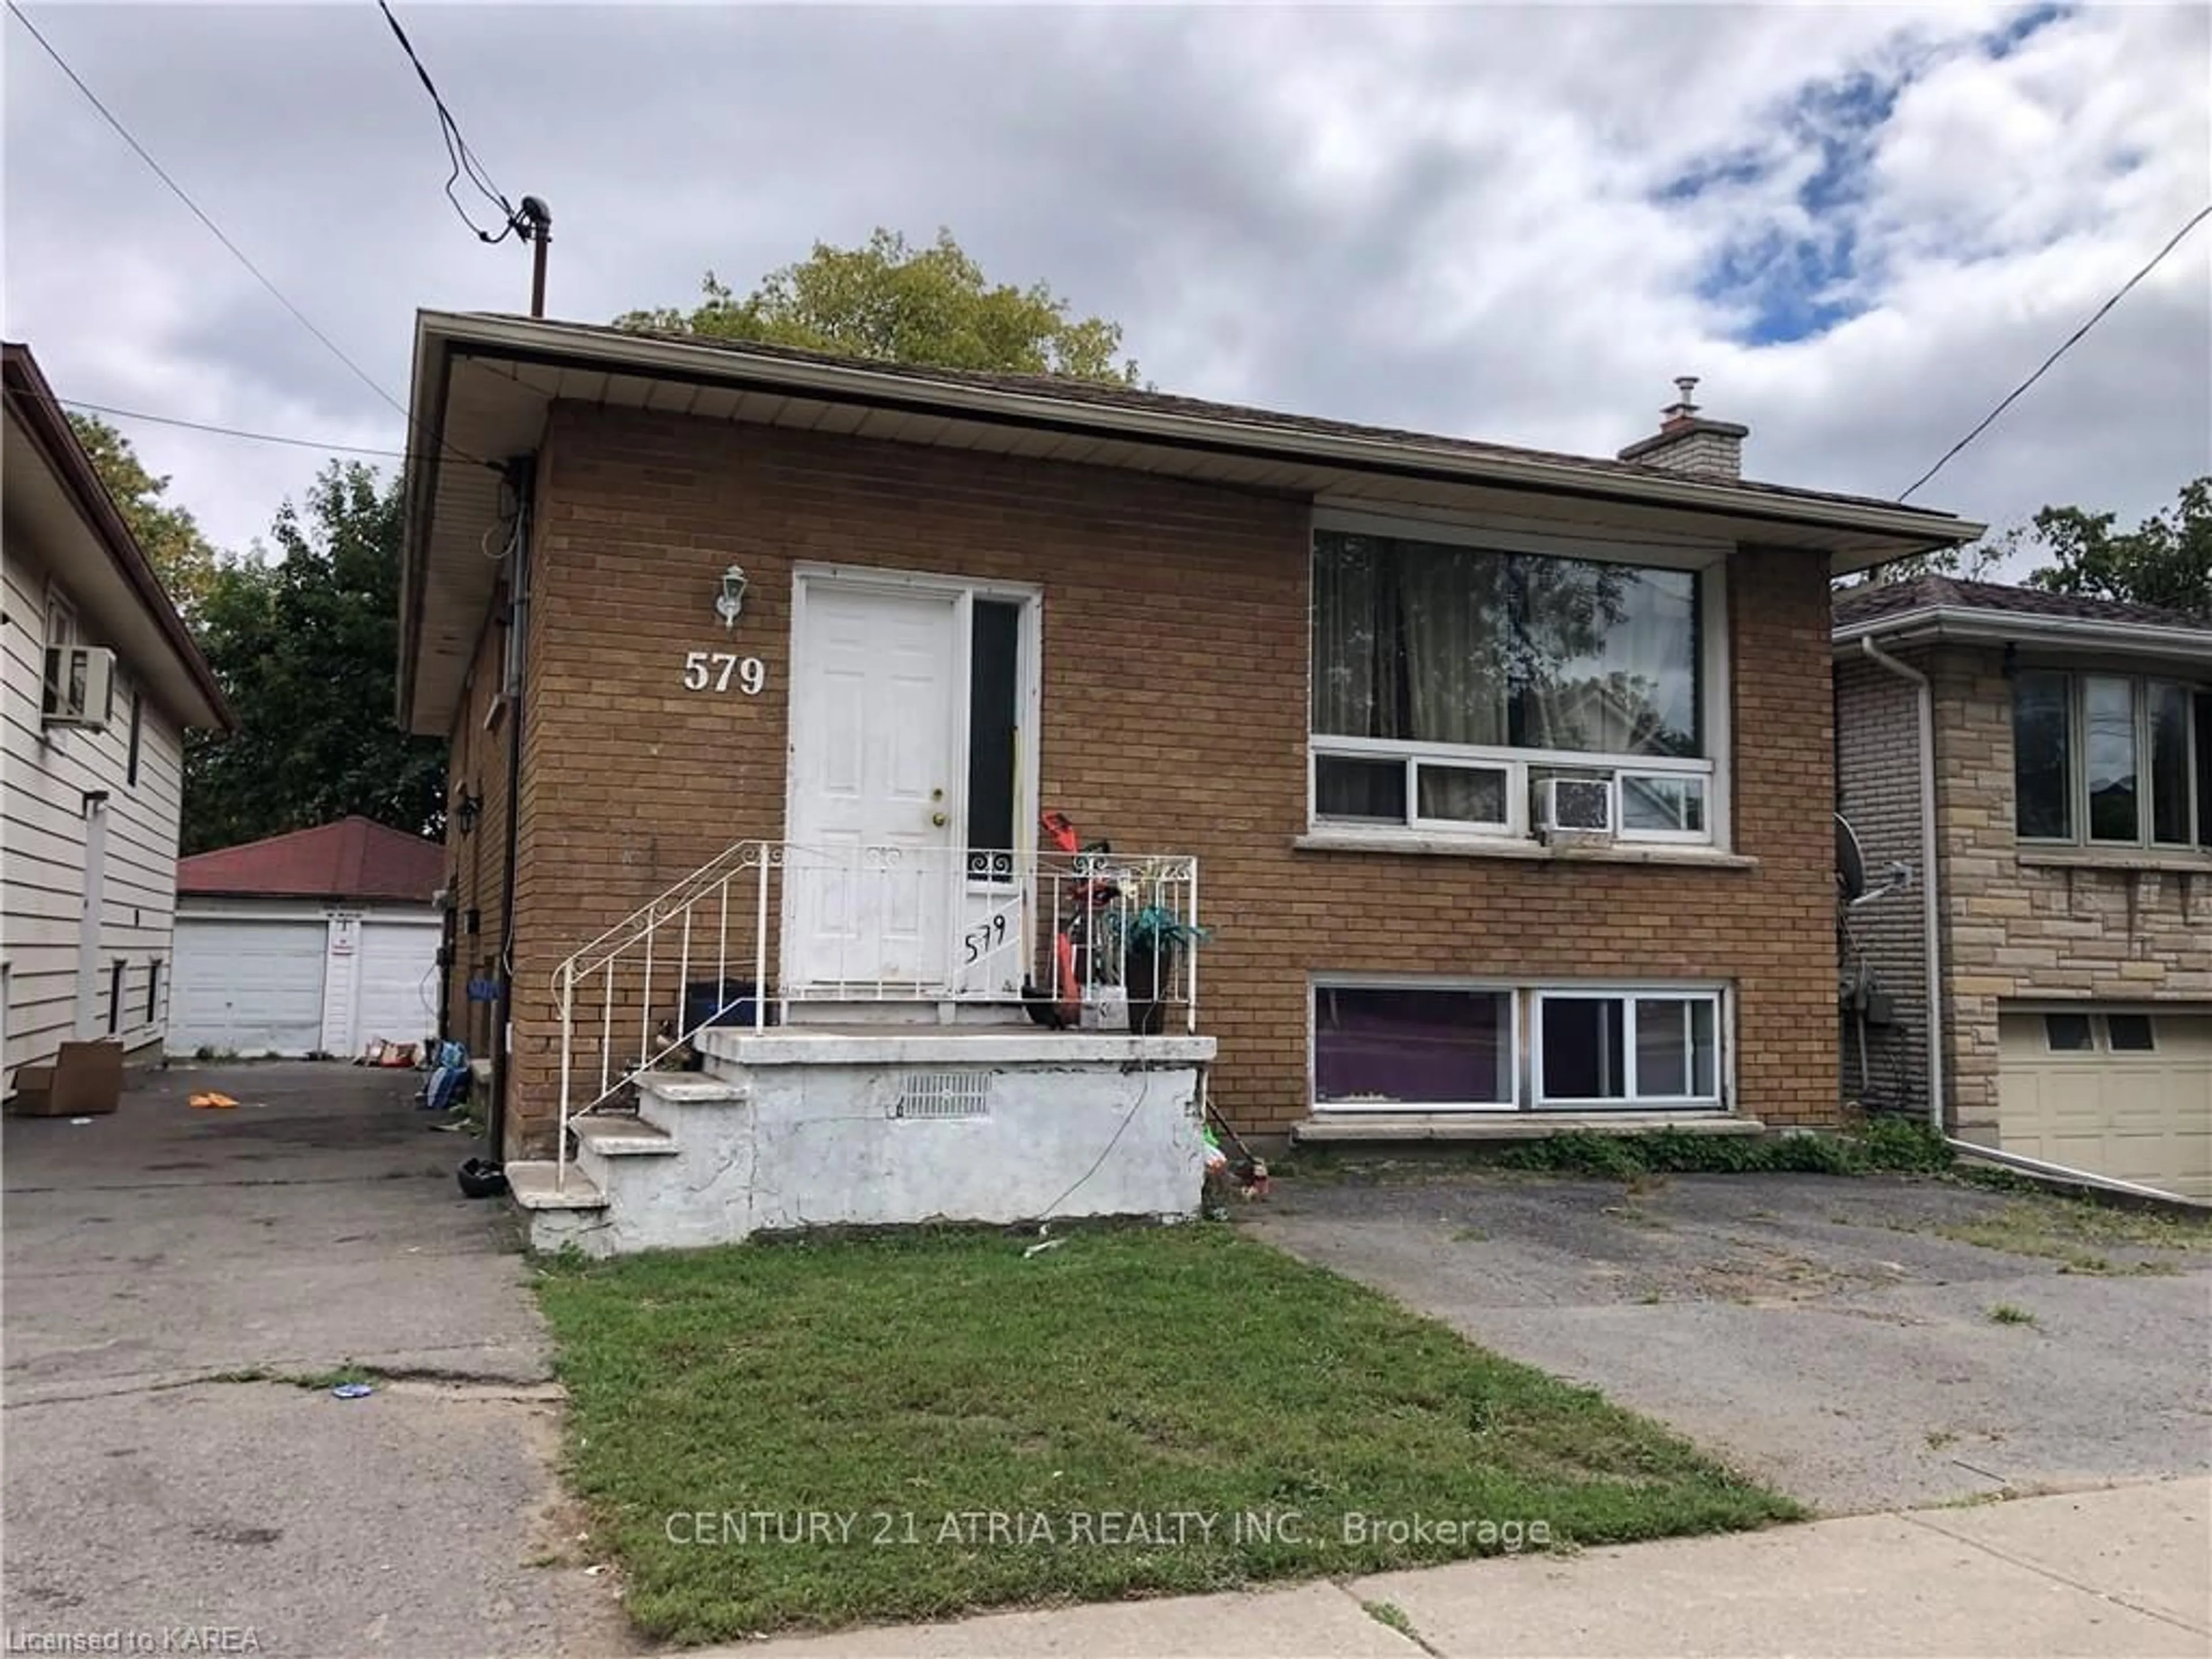 Frontside or backside of a home for 579 Macdonnell St, Kingston Ontario K7K 4W9